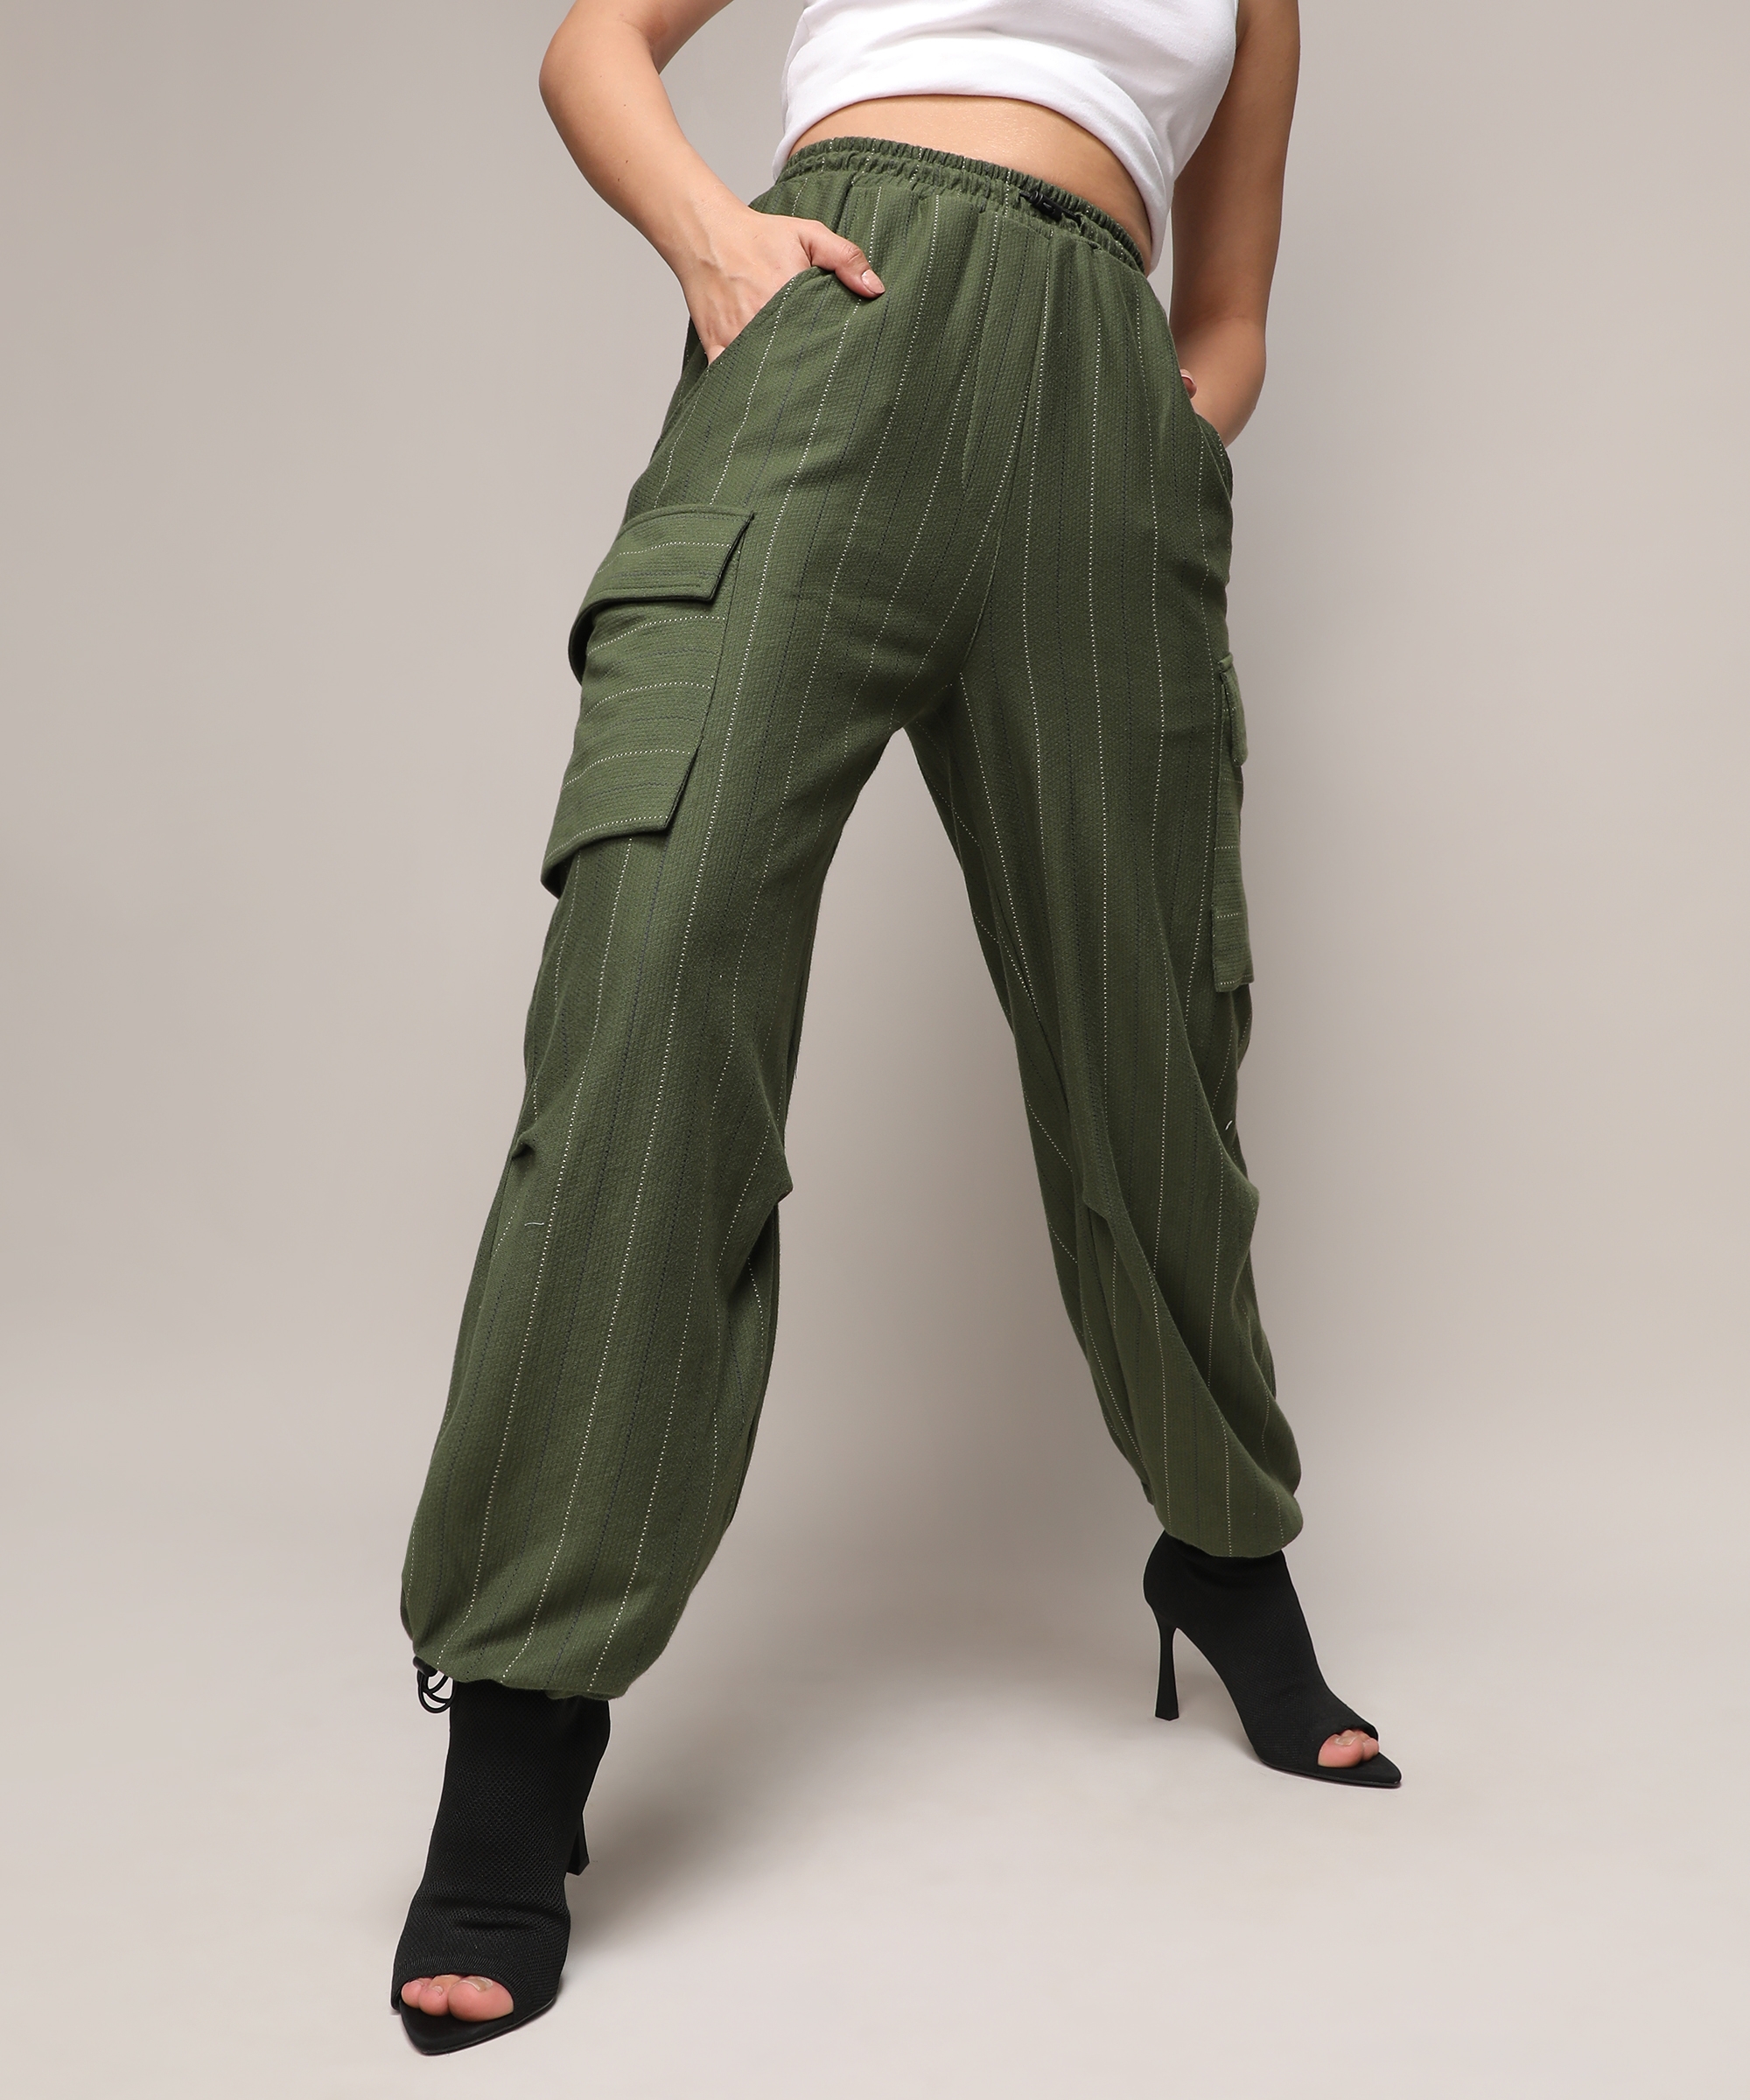 CAMPUS SUTRA | Women's Forest Green Striped Cargos